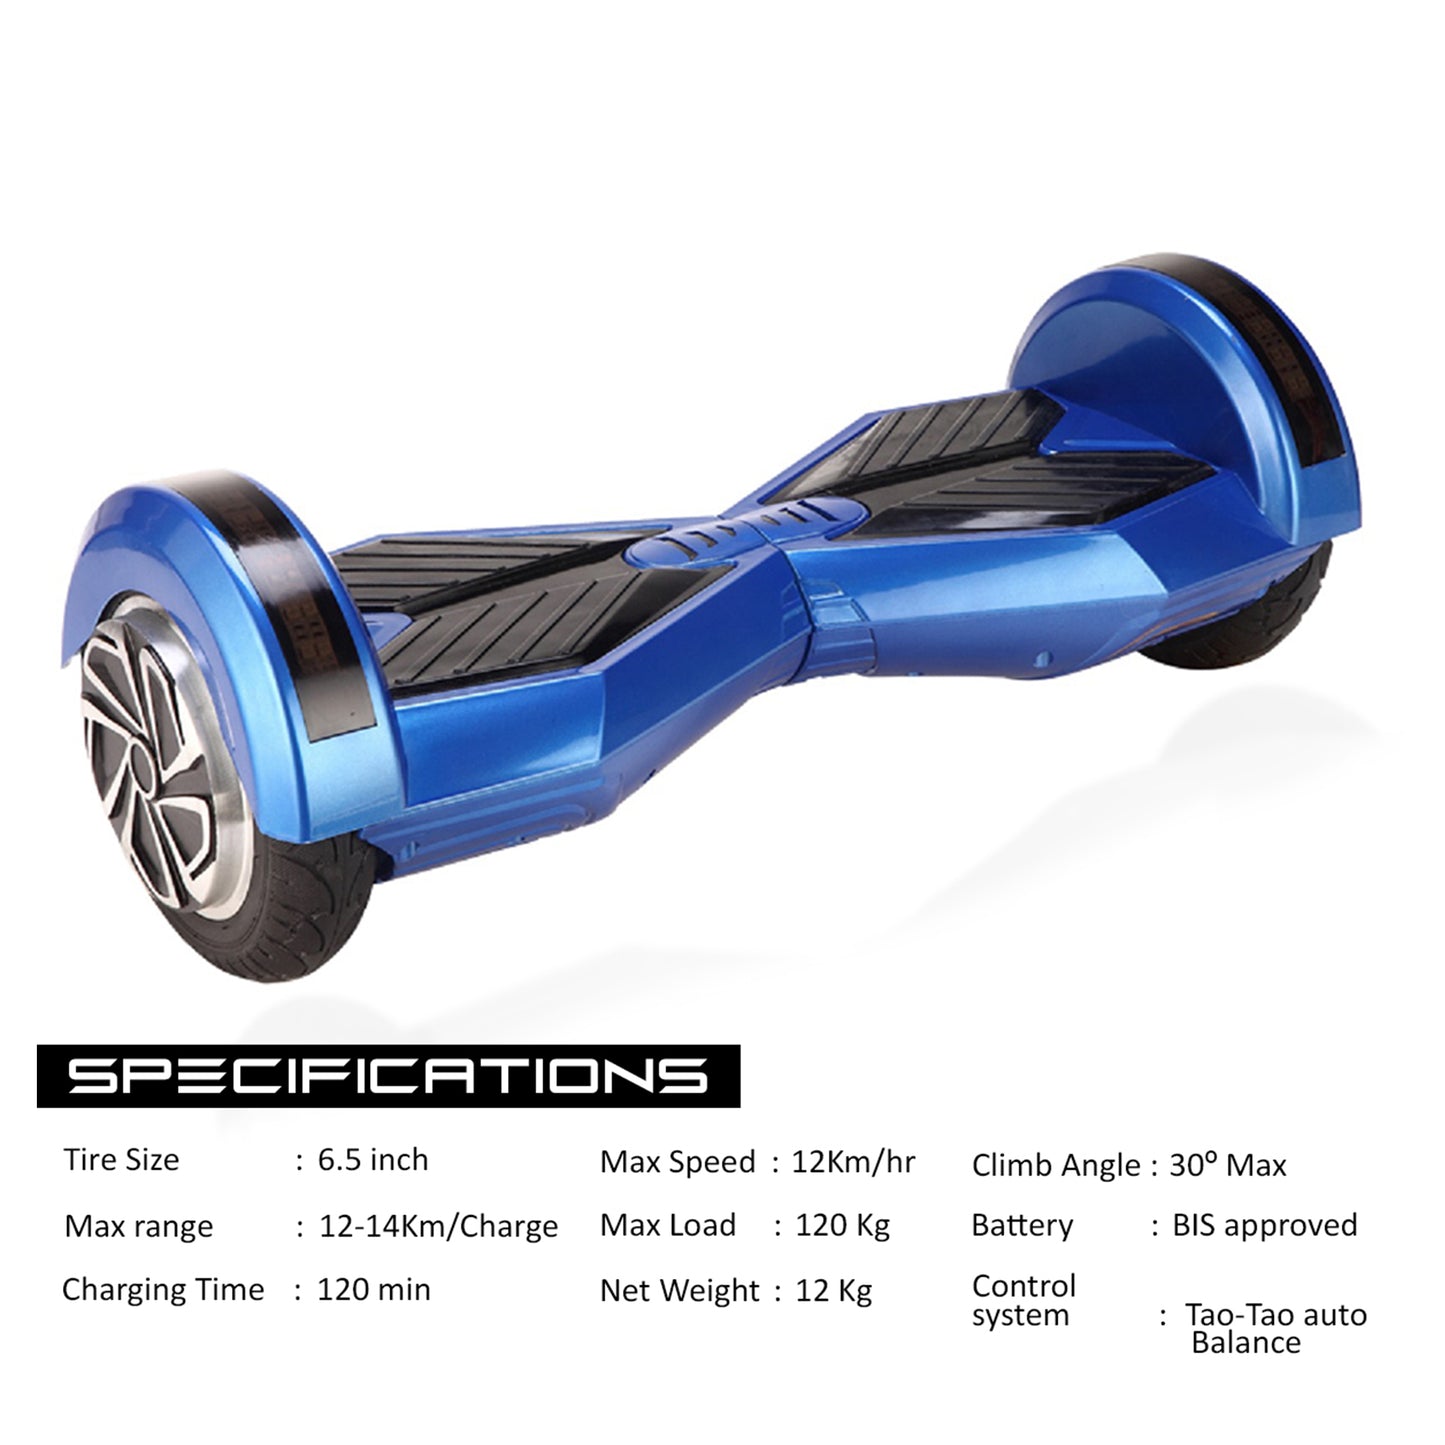 TYGATEC T5 - Powered Up Auto Balancing Hoverboard